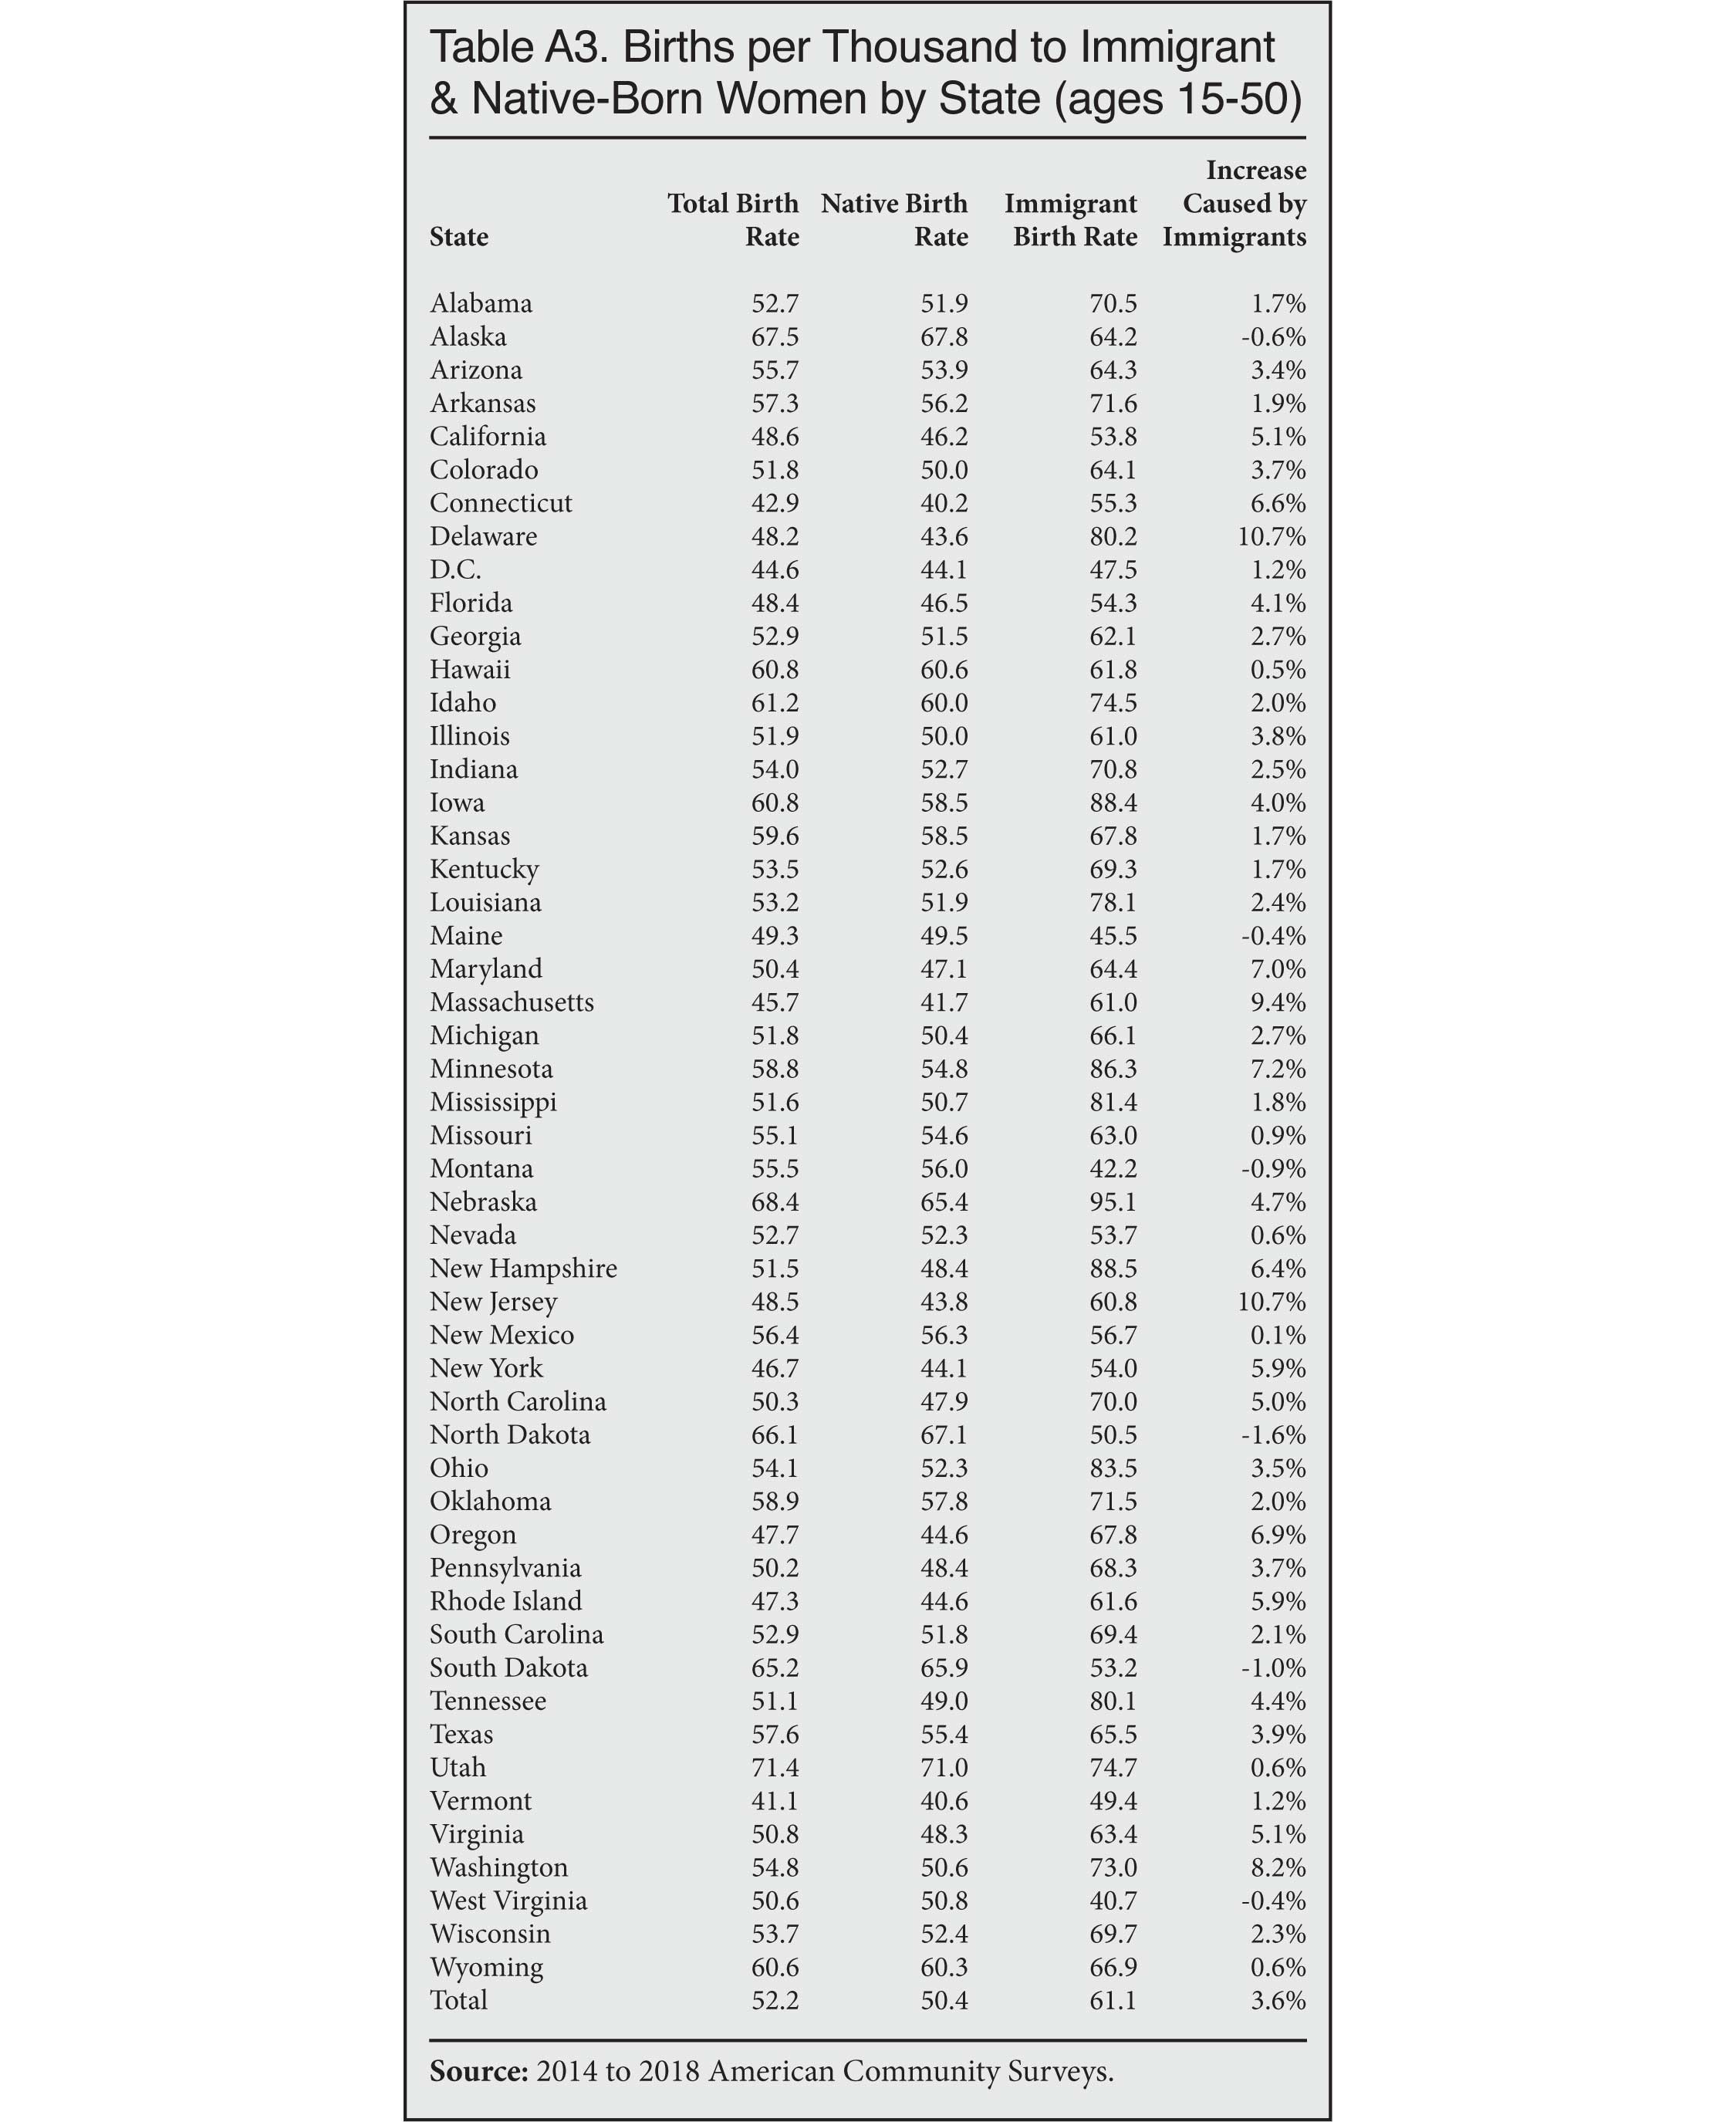 Table: Births per Thousand to Immigrant and Native Born Women by State, Ages 15-50